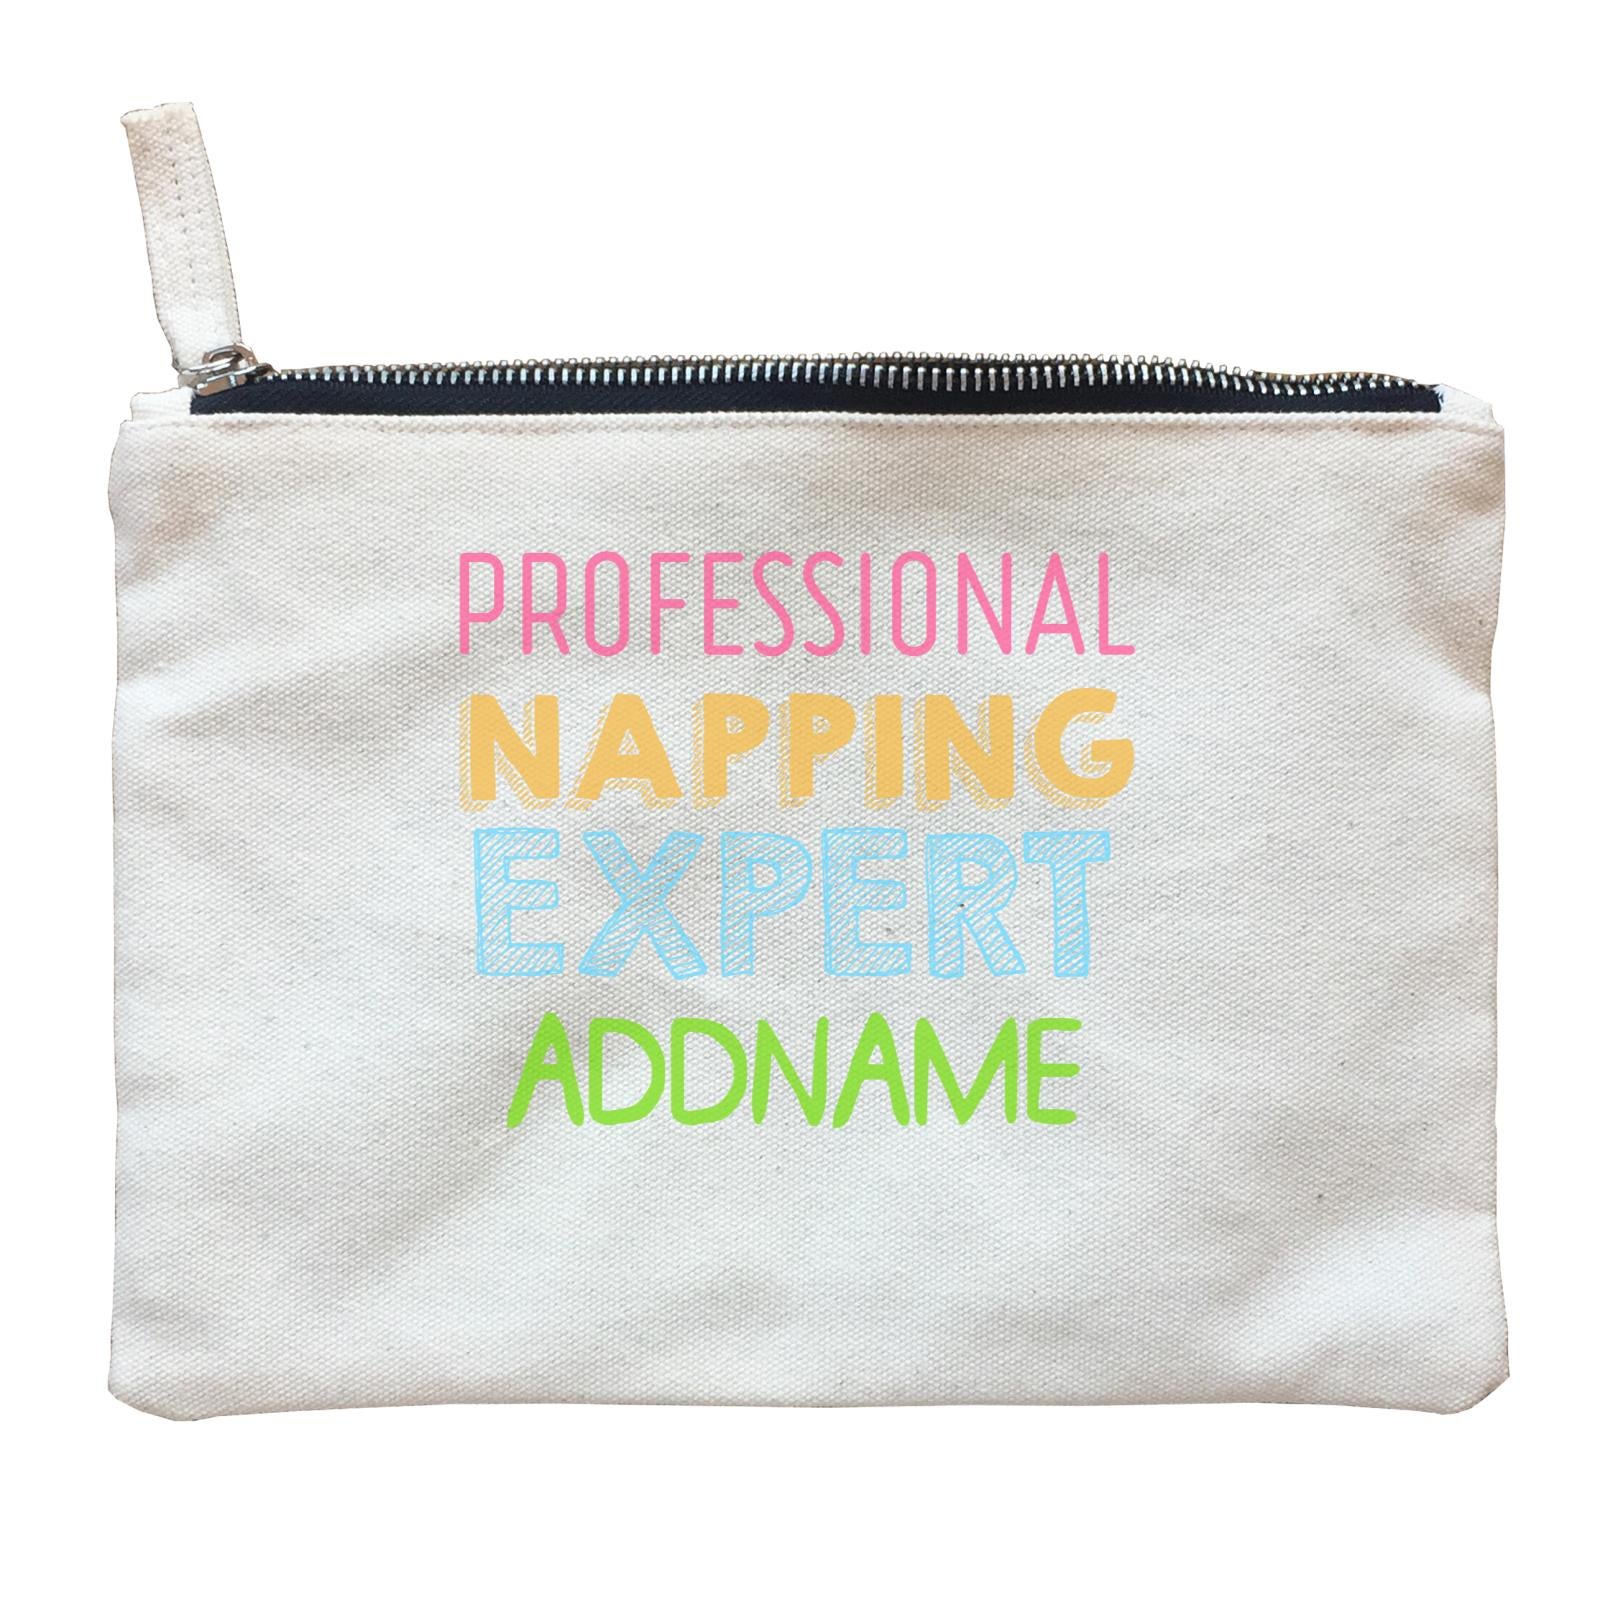 Professional Napping Expert Addname Zipper Pouch